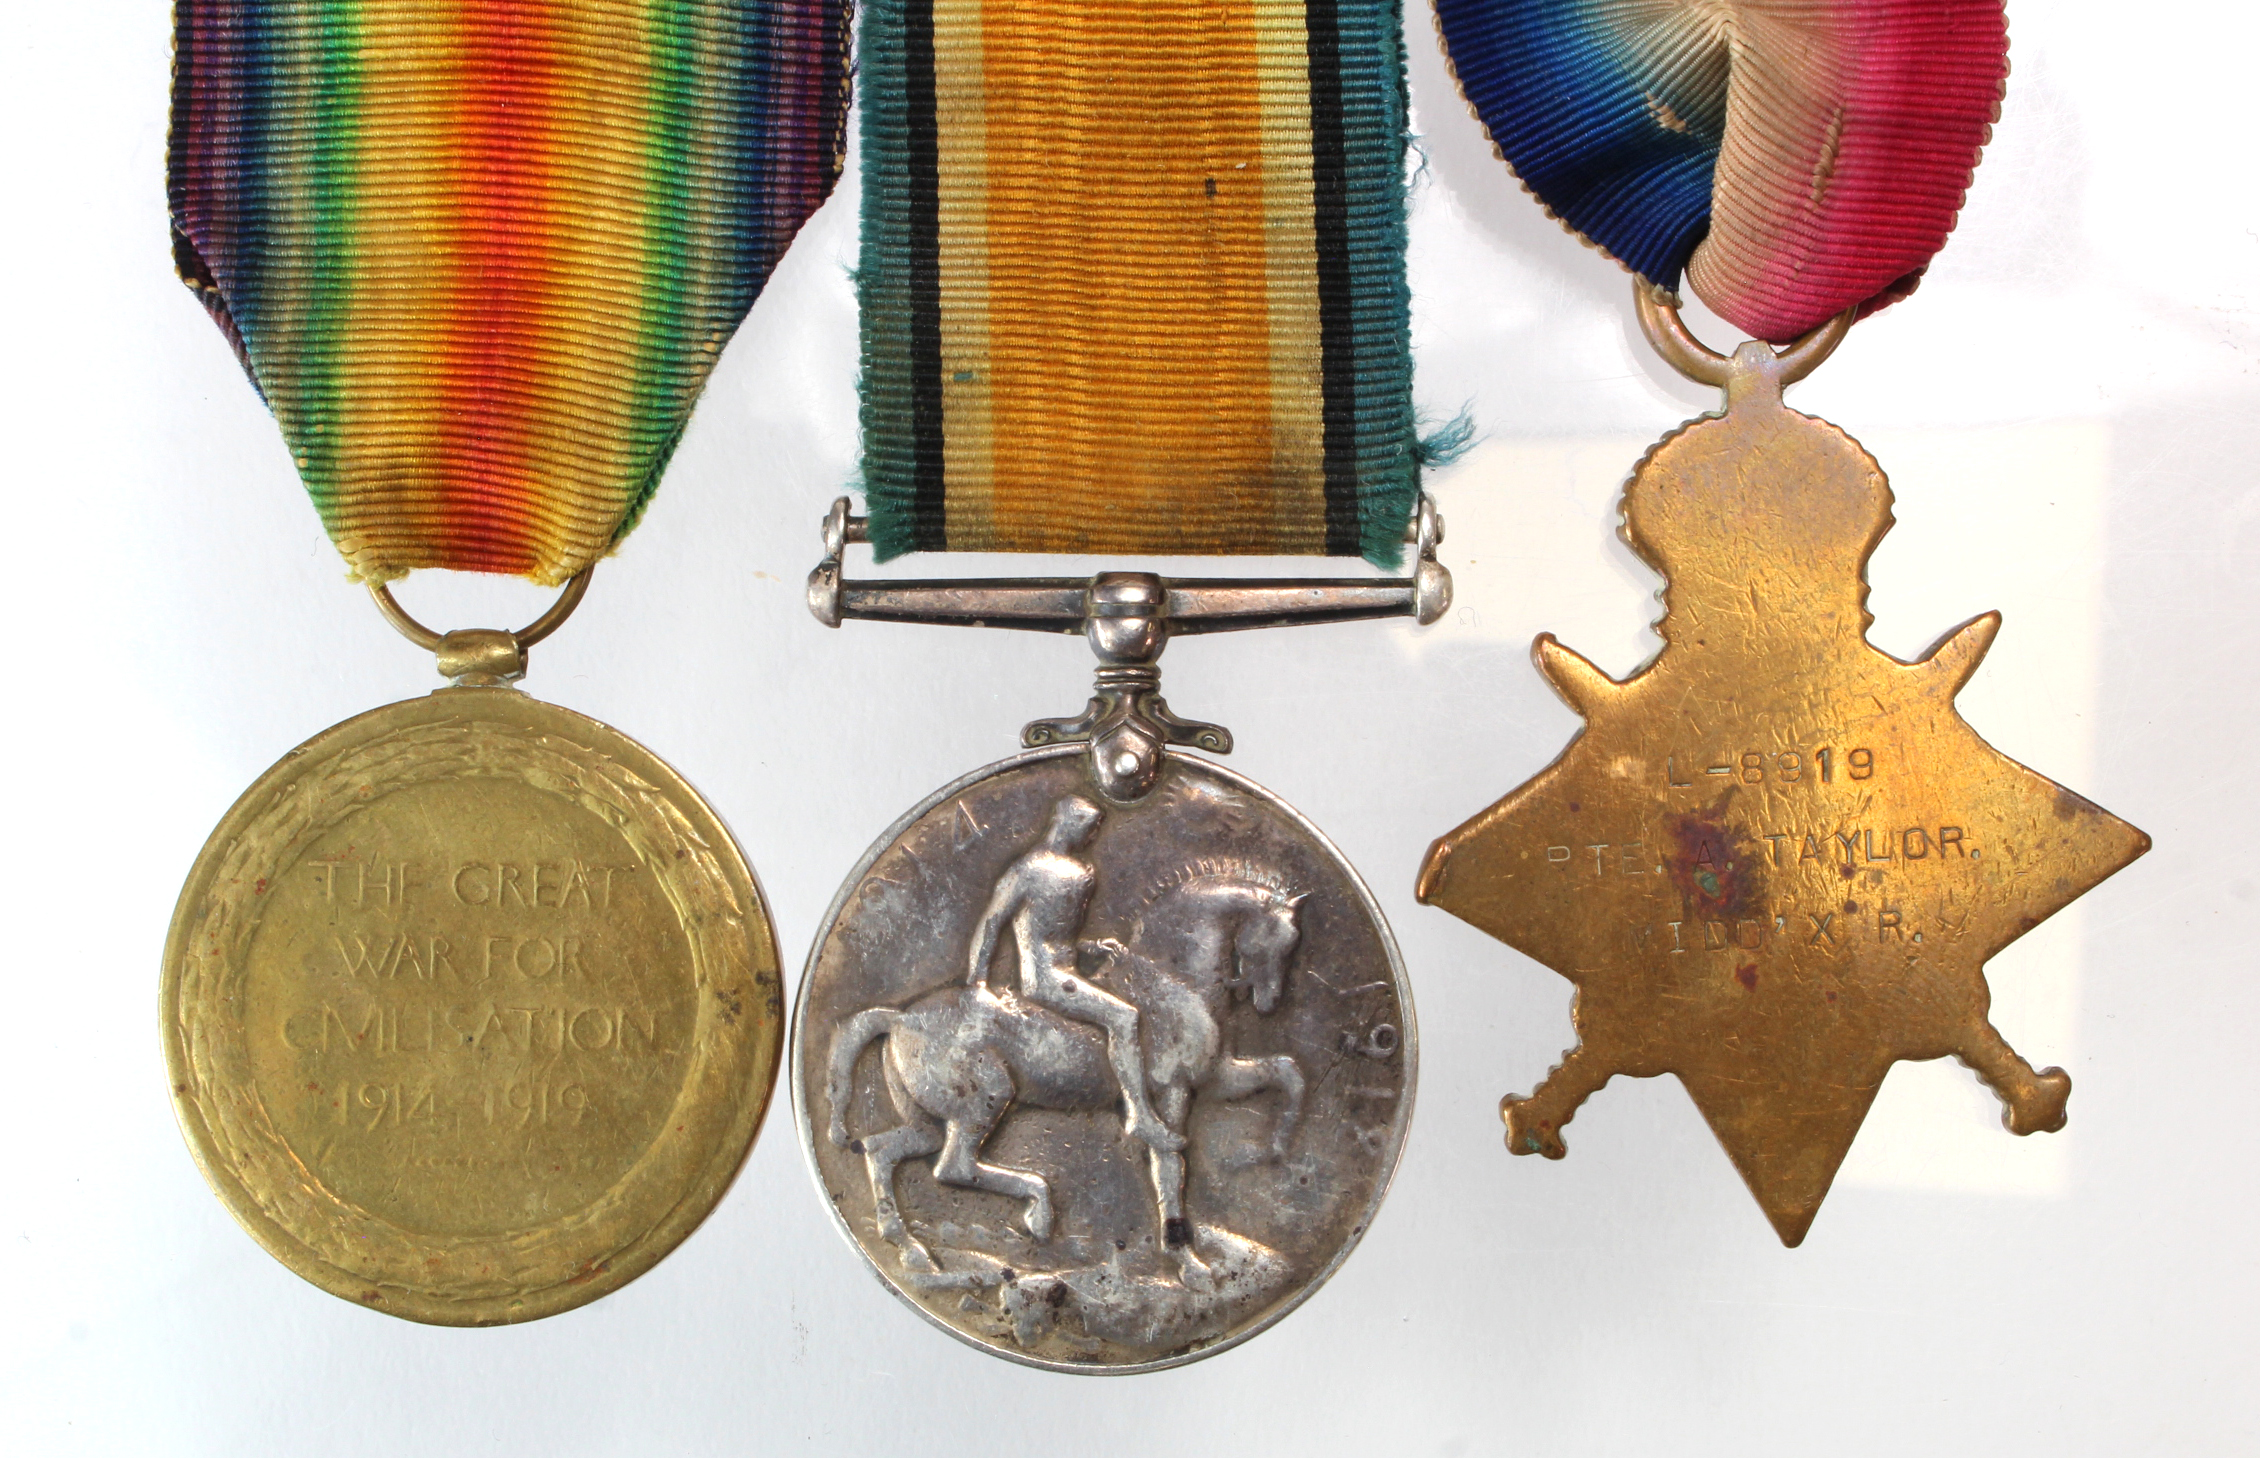 1915 Star Trio to L-8919 Pte A Taylor, Middlesex Regt. Medal mounted as worn and very polished. Sold - Image 2 of 2